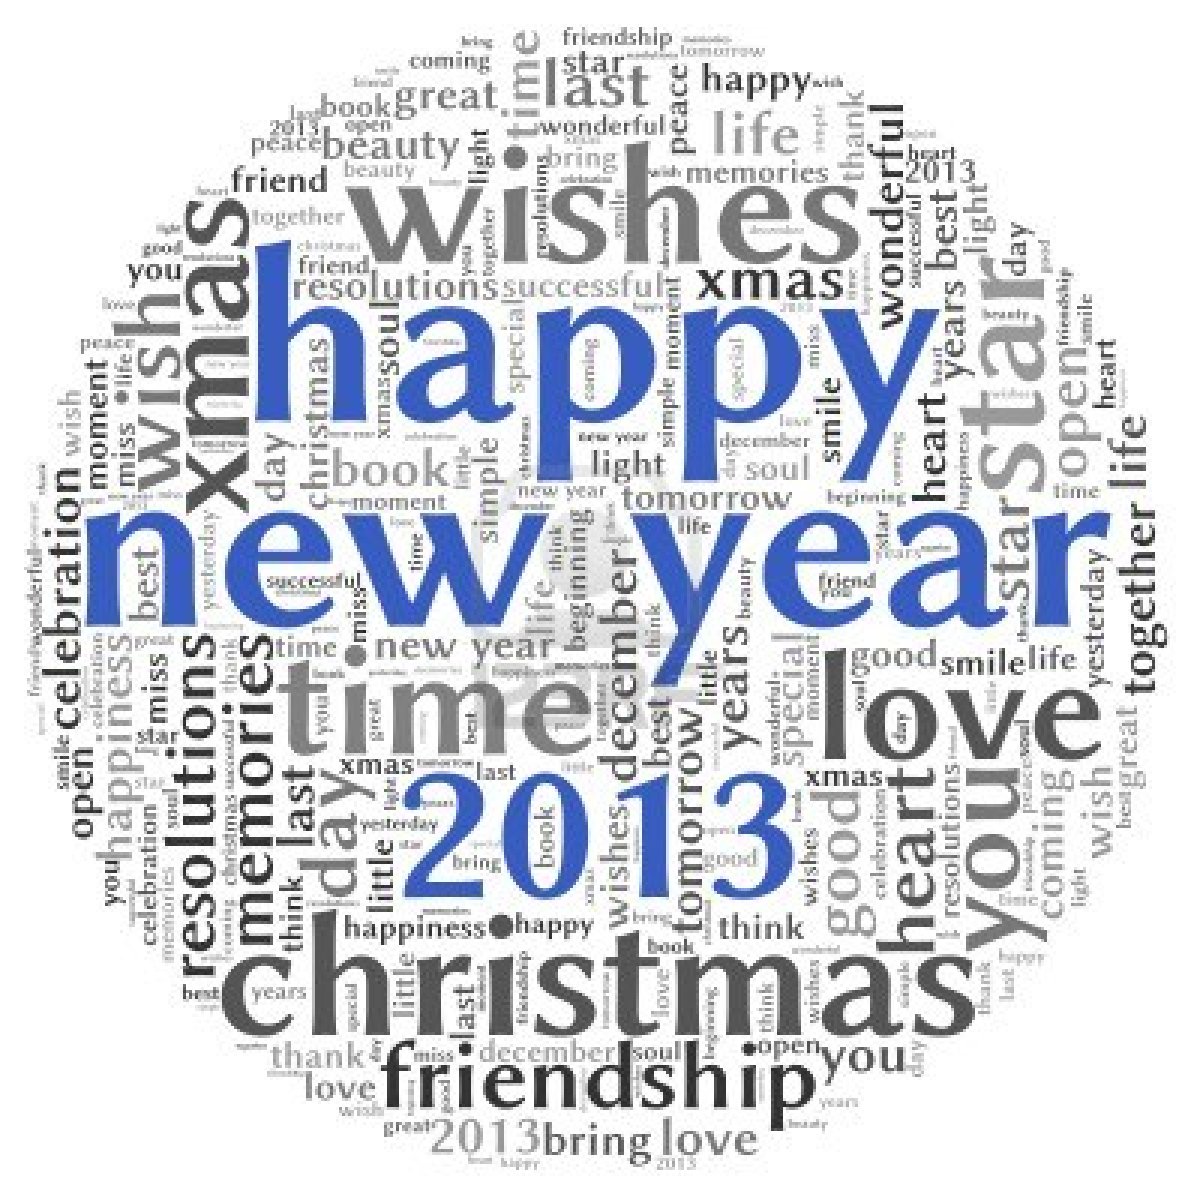 15891110-happy-new-year-2013-greeting-card-in-tag-cloud